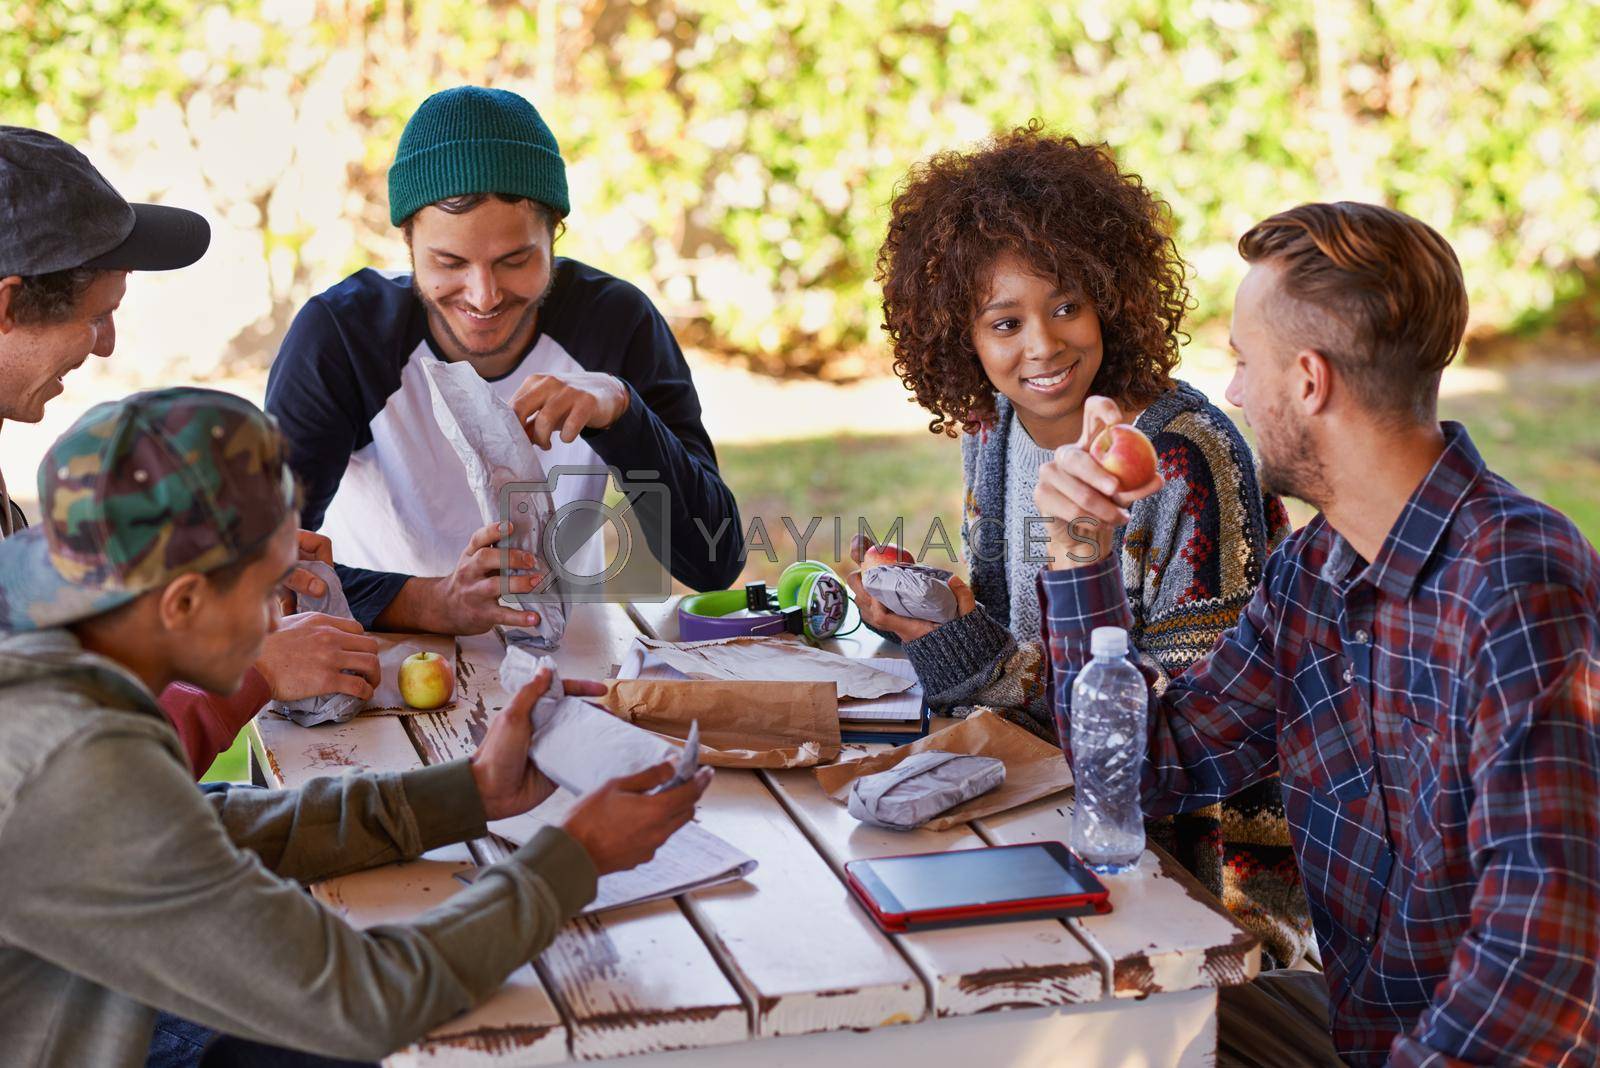 A group of friends around an outdoor table.